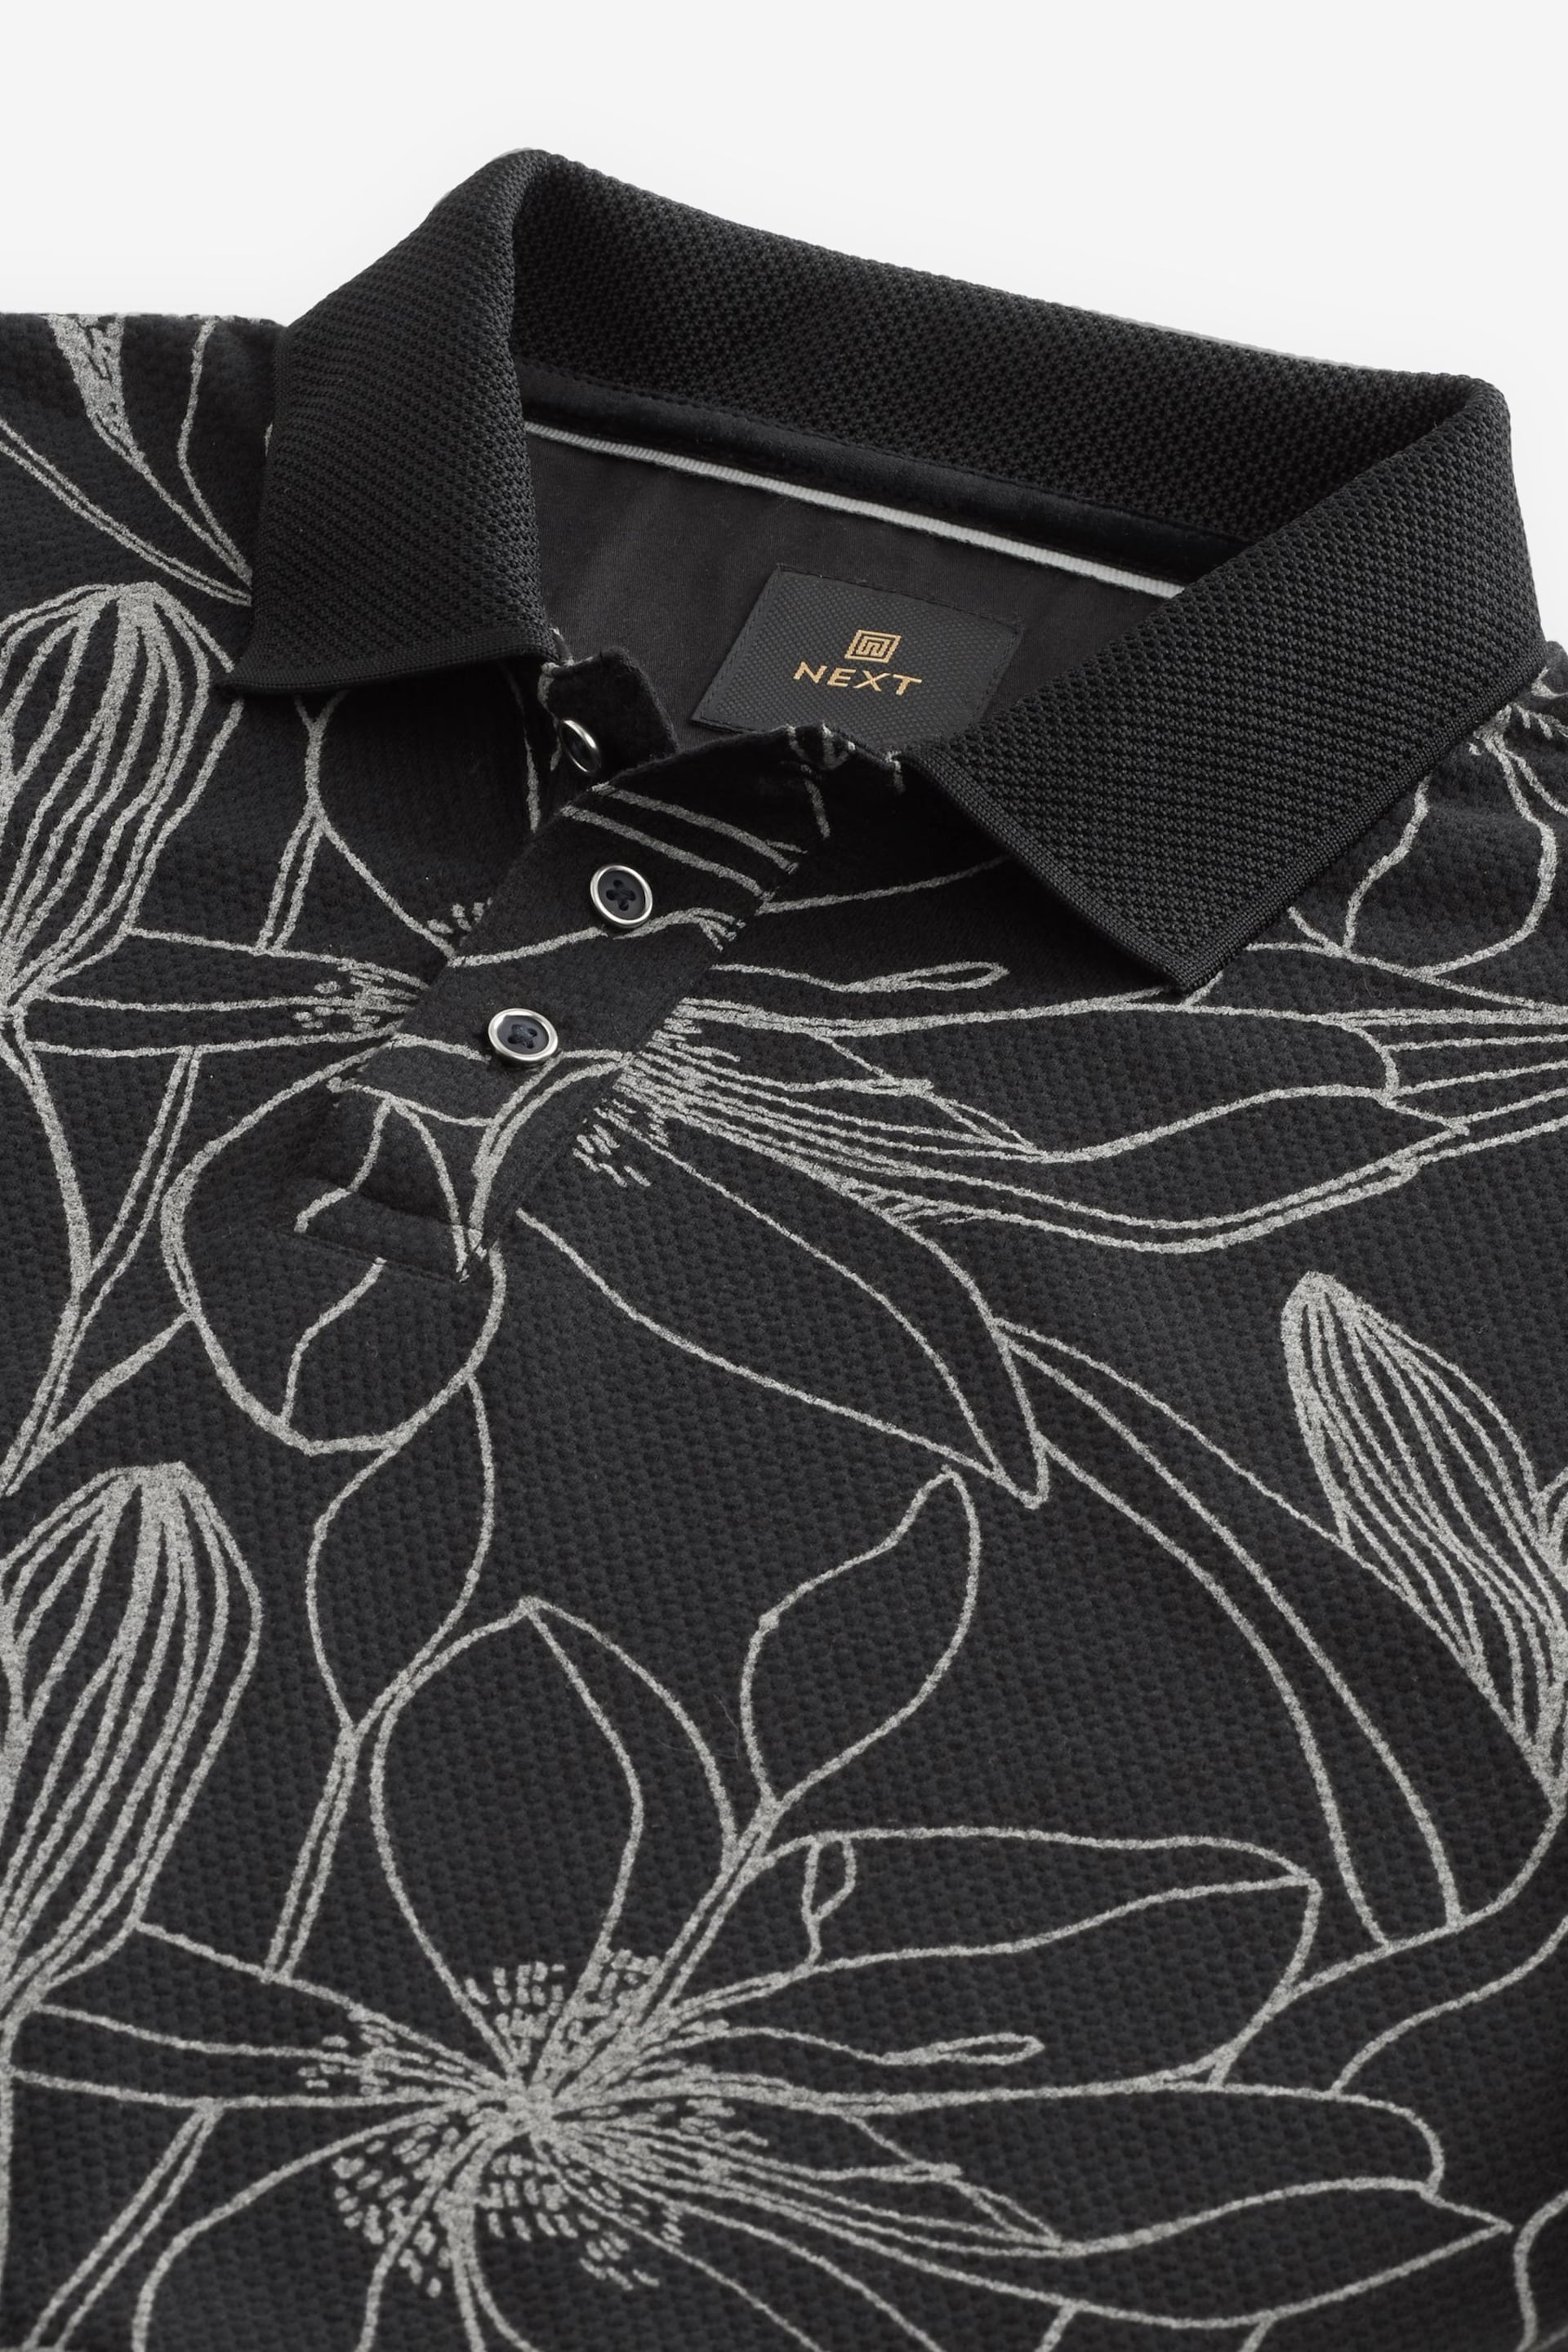 Black/White Floral Print Textured Polo Shirt - Image 7 of 8